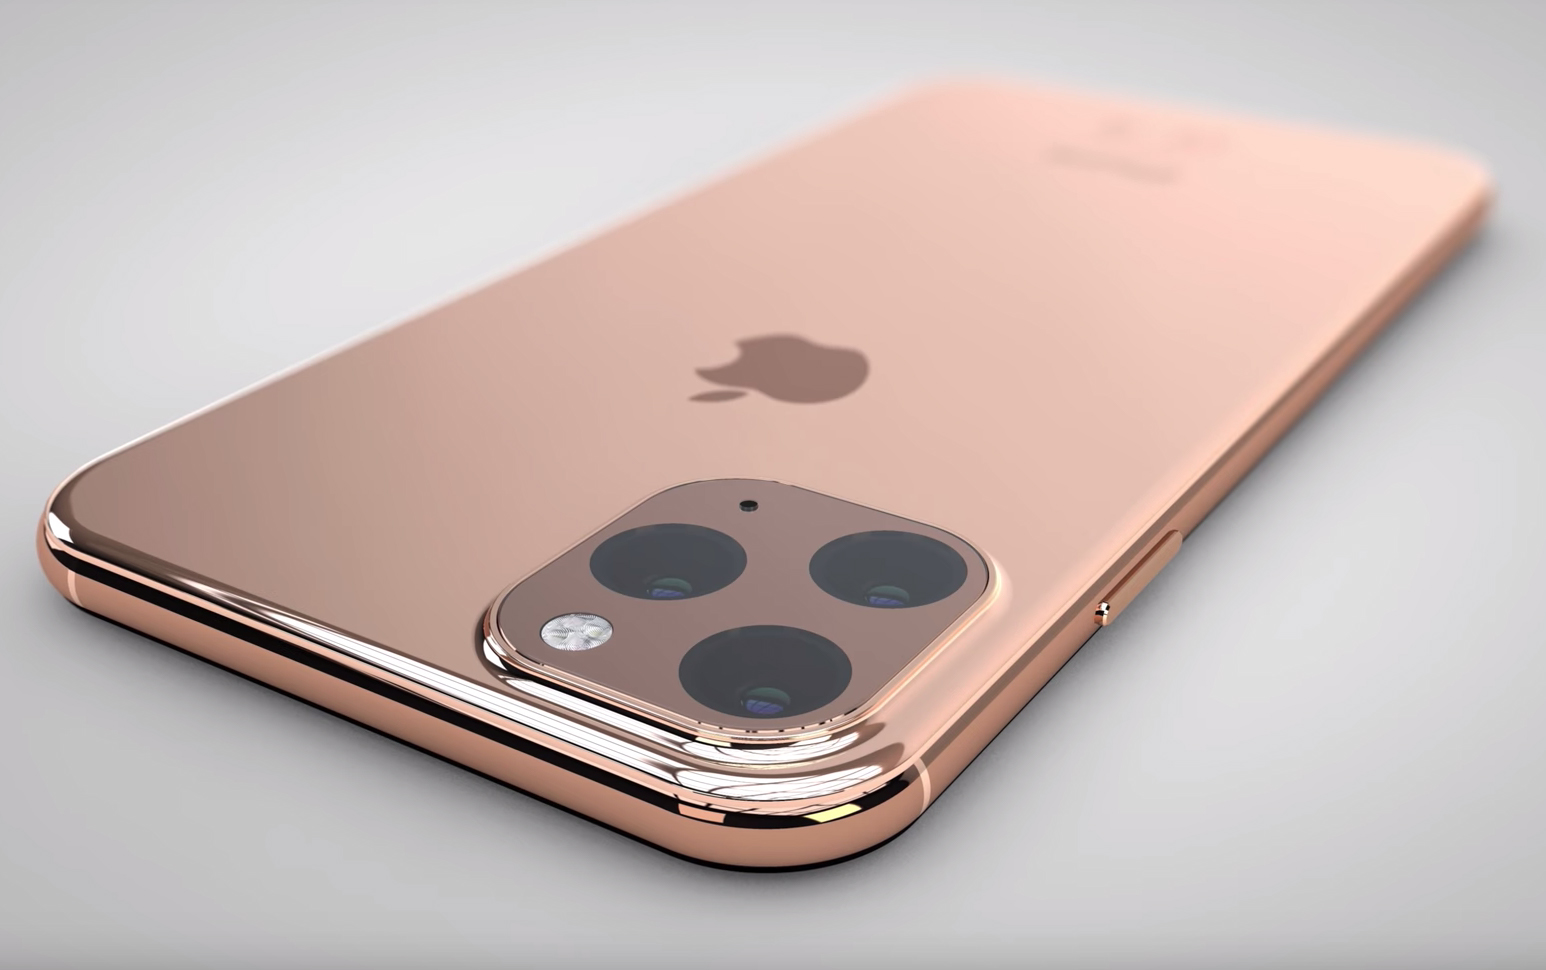 Purported Internal Document May Confirm Apple S Iphone 11 Product Names And Ios 13 Release Plans